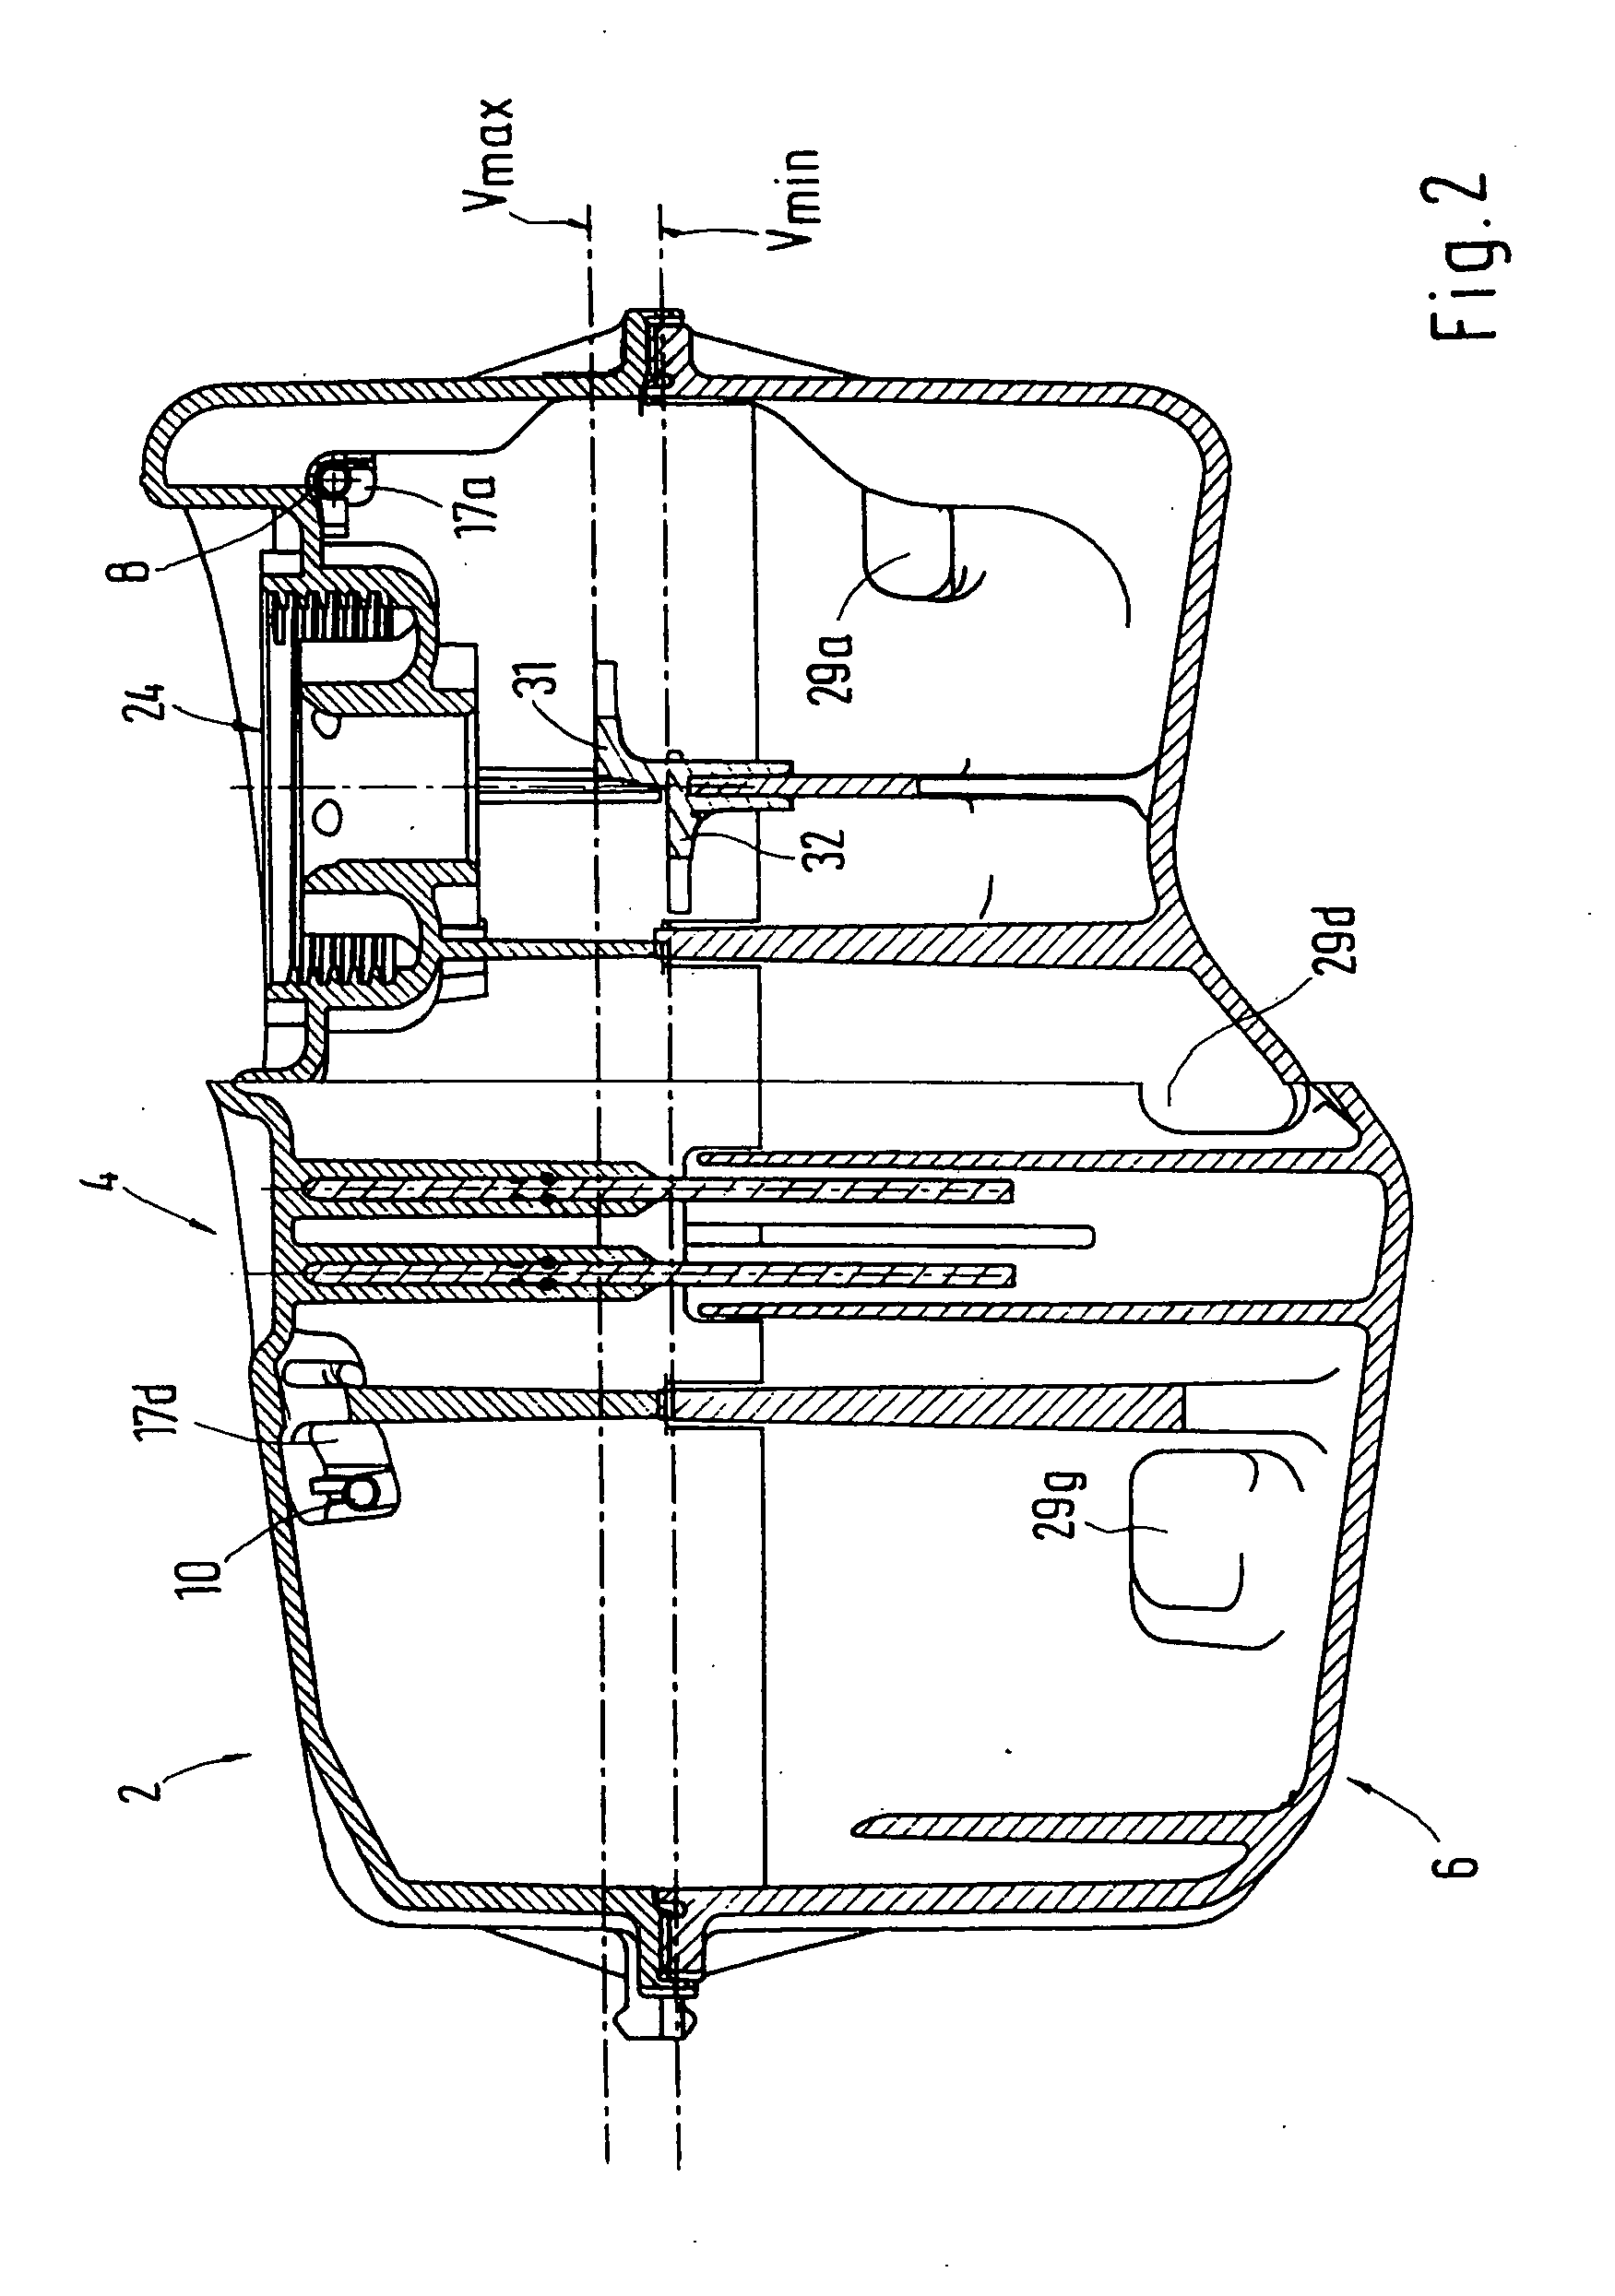 Compensation reservoir for a cooling circuit of an internal combustion engine